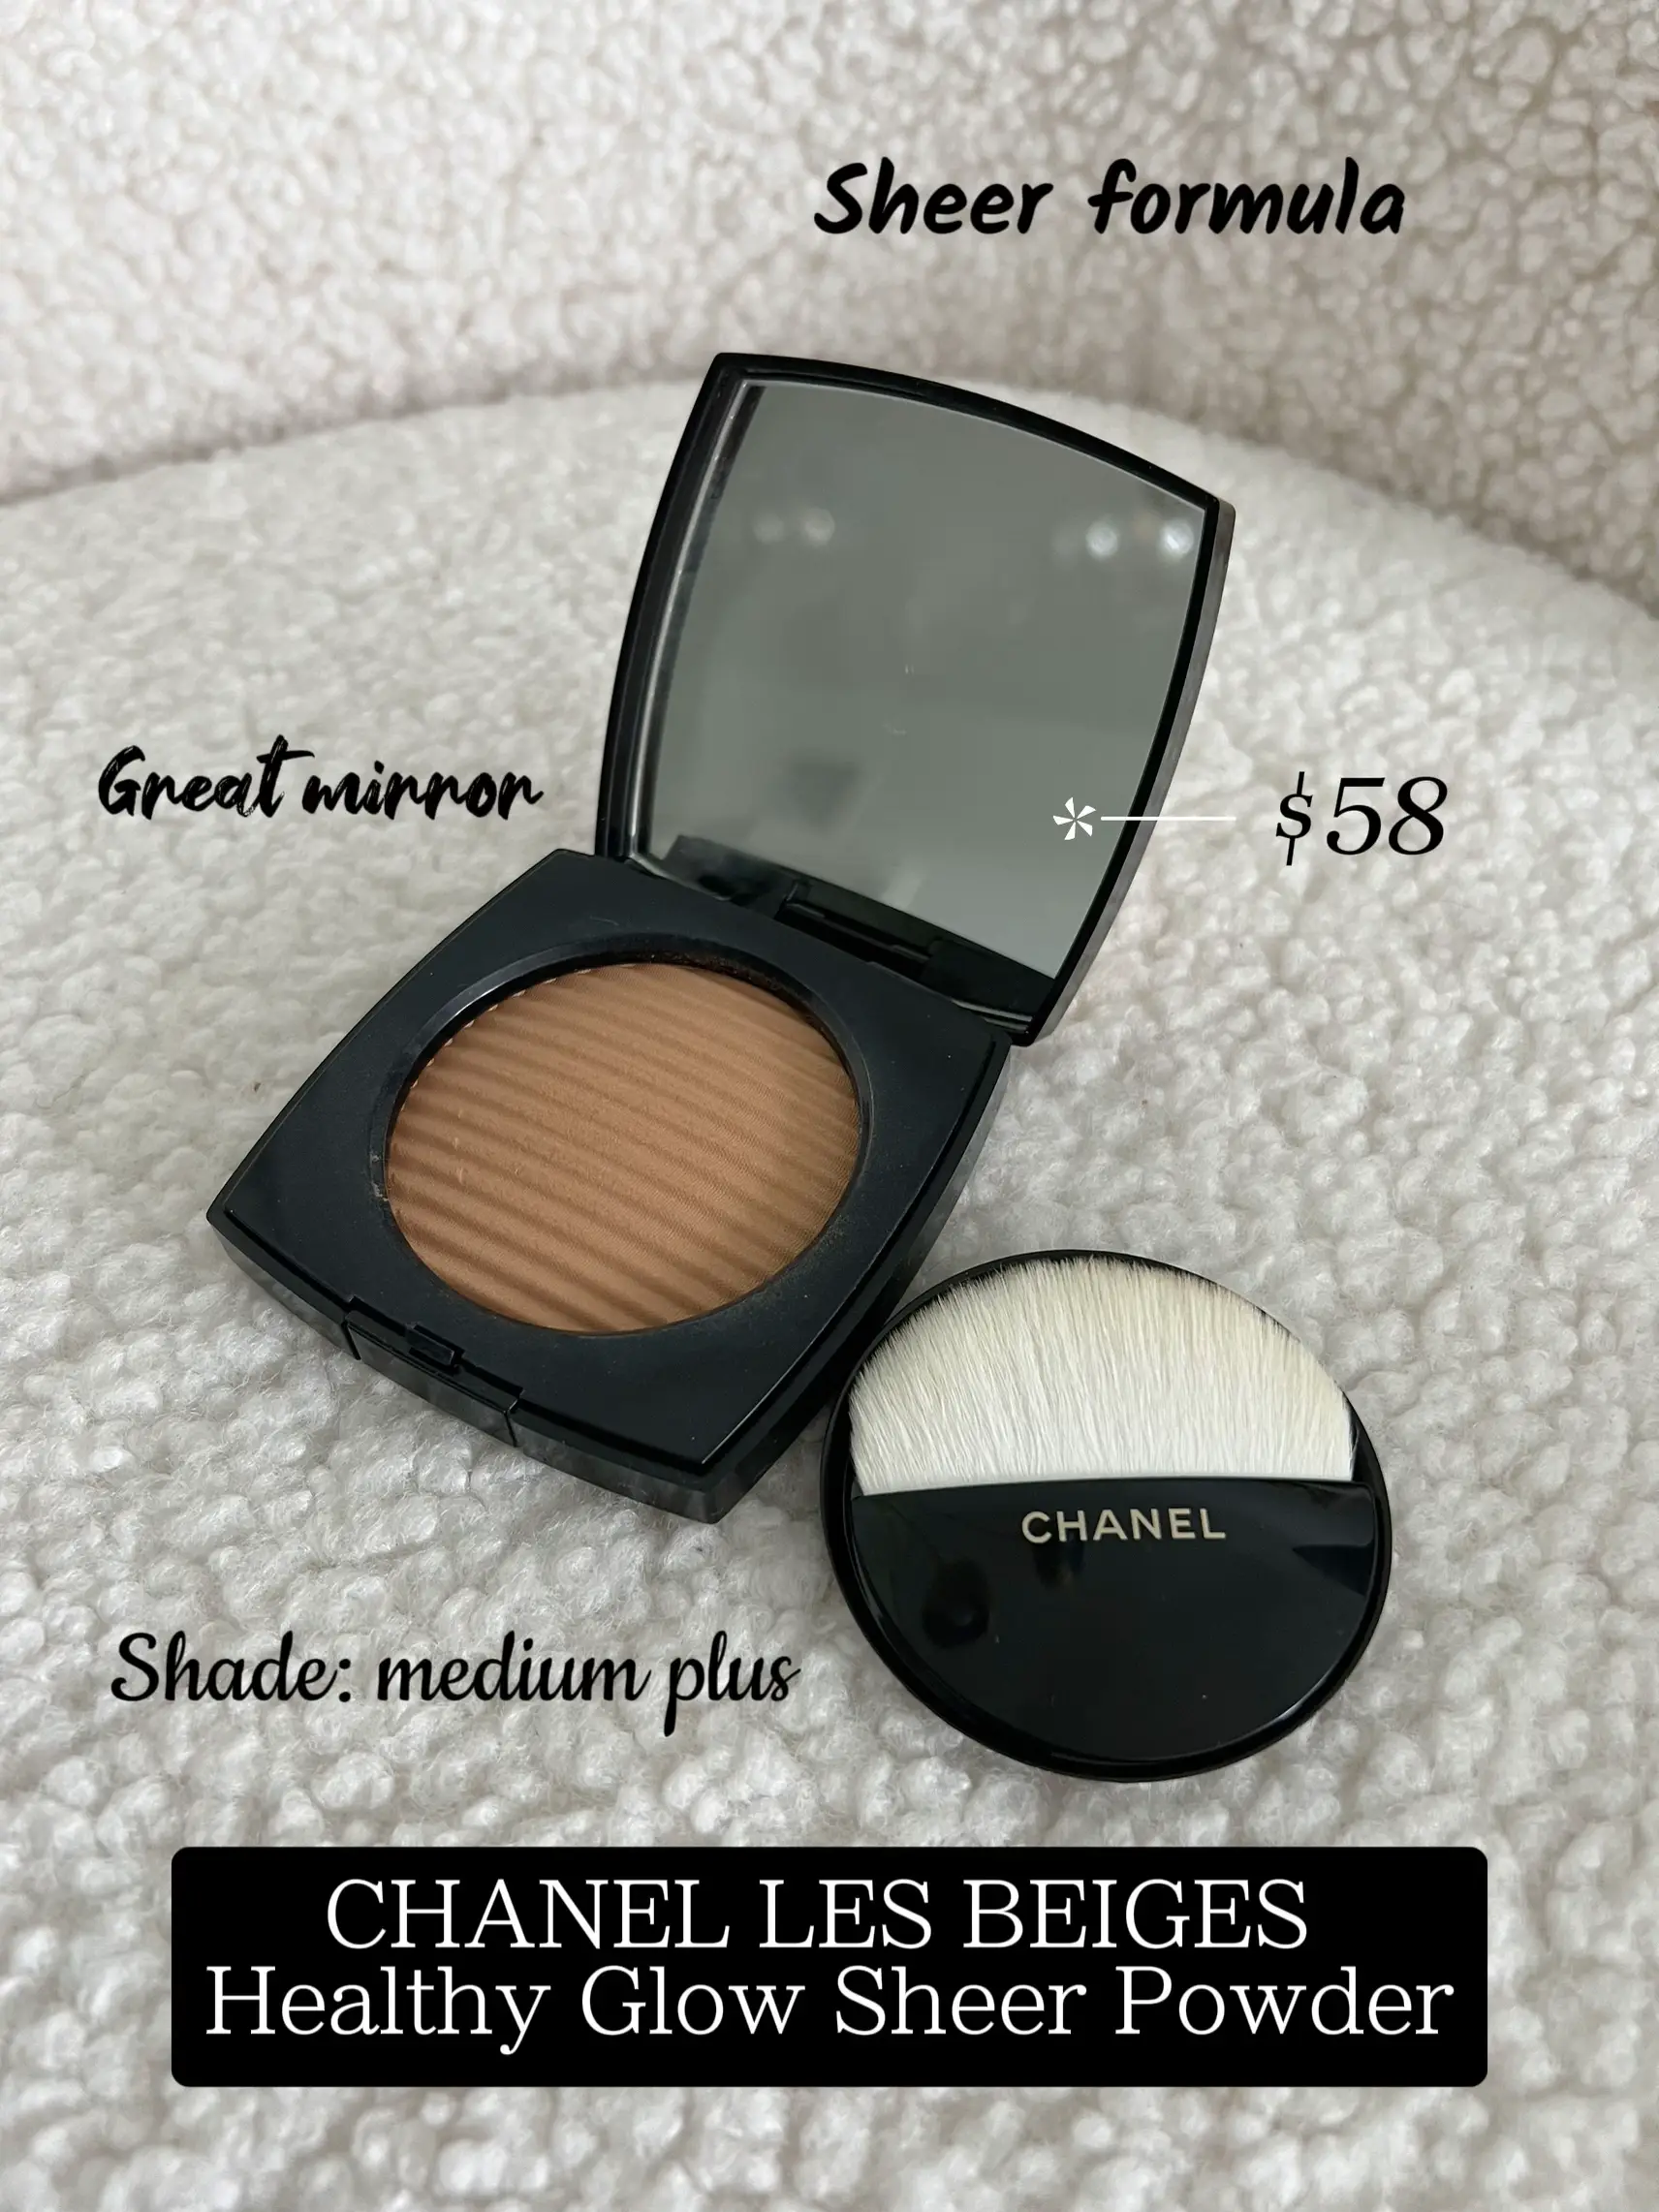 Chanel Beauty Haul, Gallery posted by Nicole_jordy